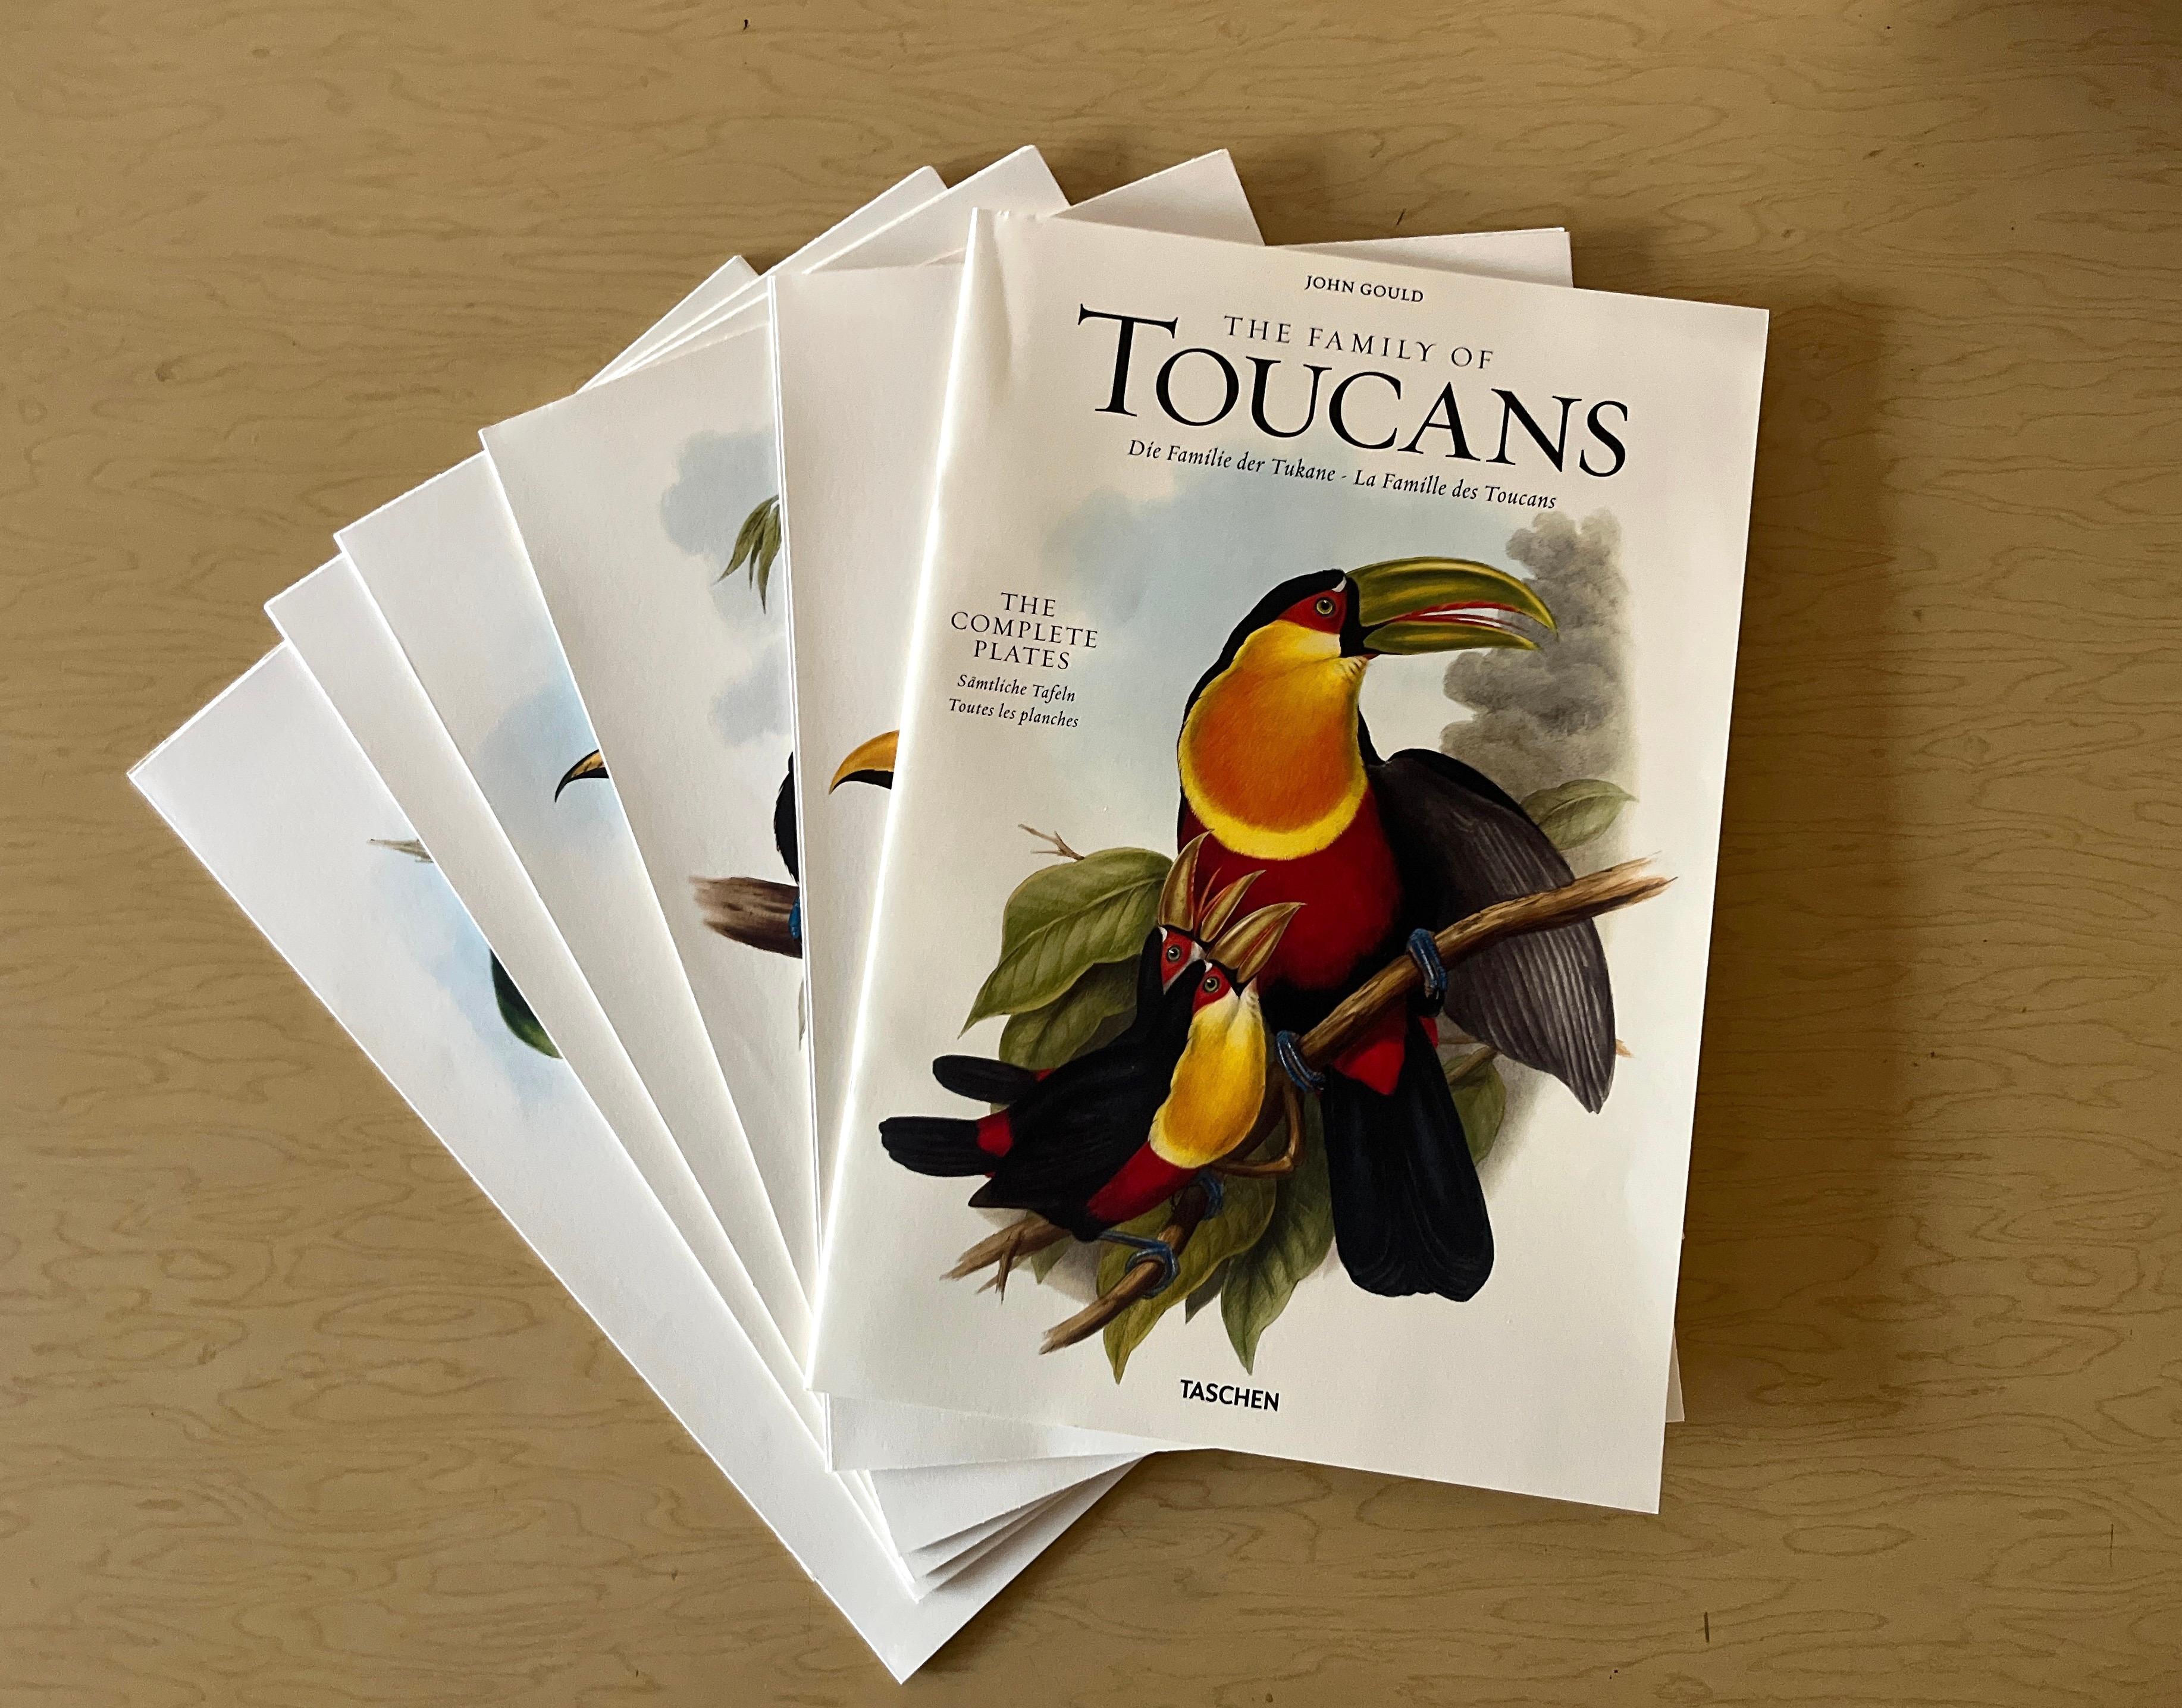 American The Family of Toucans: The Complete Plates by John Gould, Pub. by Taschen, 2011 For Sale